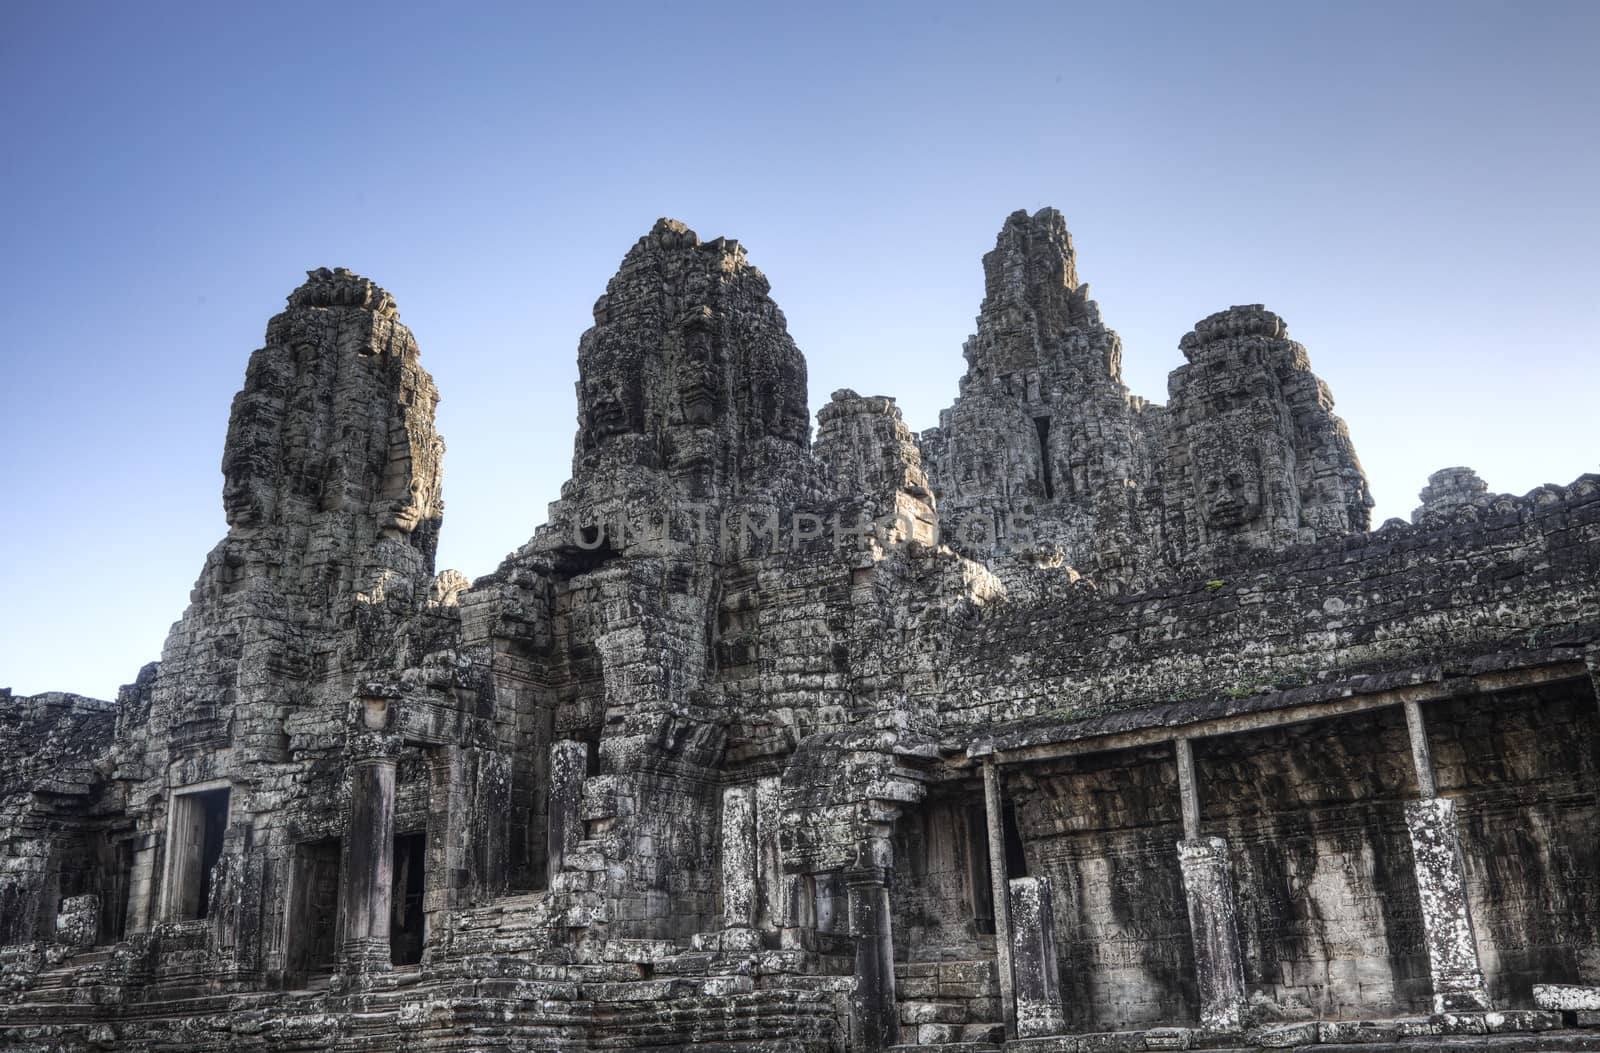 Eastern side  of Bayon temple at dusk  in Angkor Thom Cambodia. Bayon temple was built late 12th century under Jayavarman VII